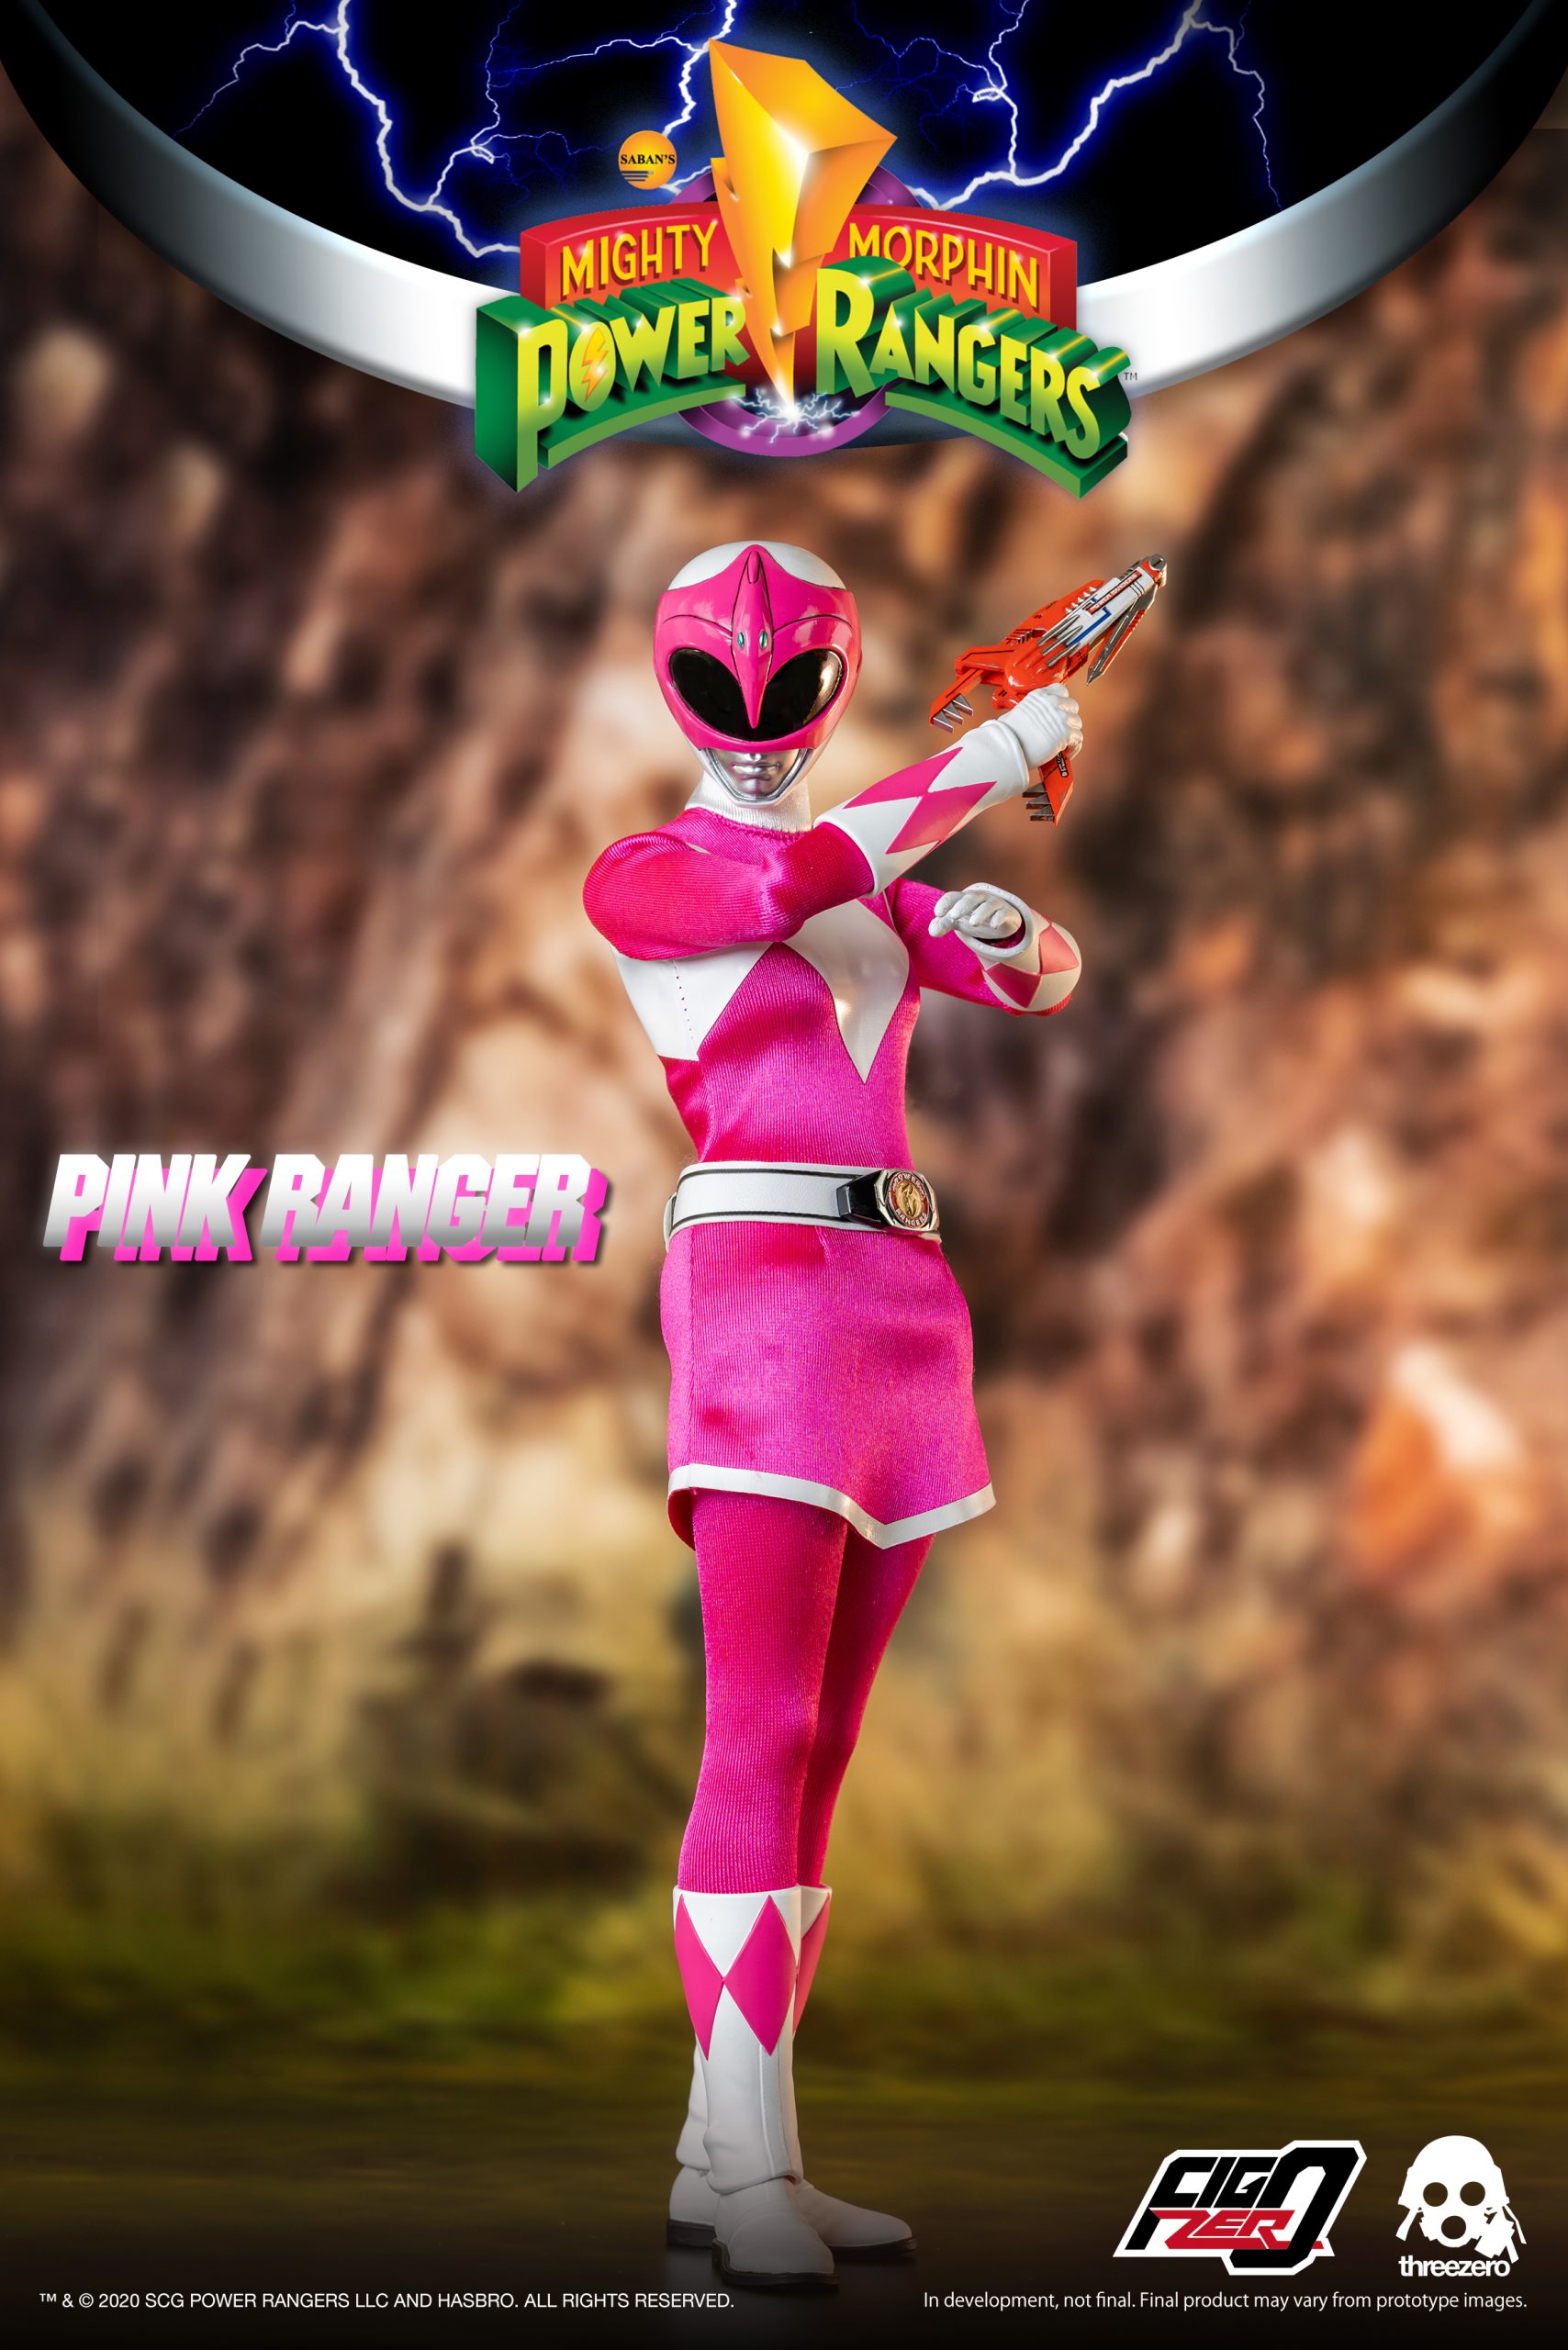 adley richard recommends pictures of the pink power ranger pic